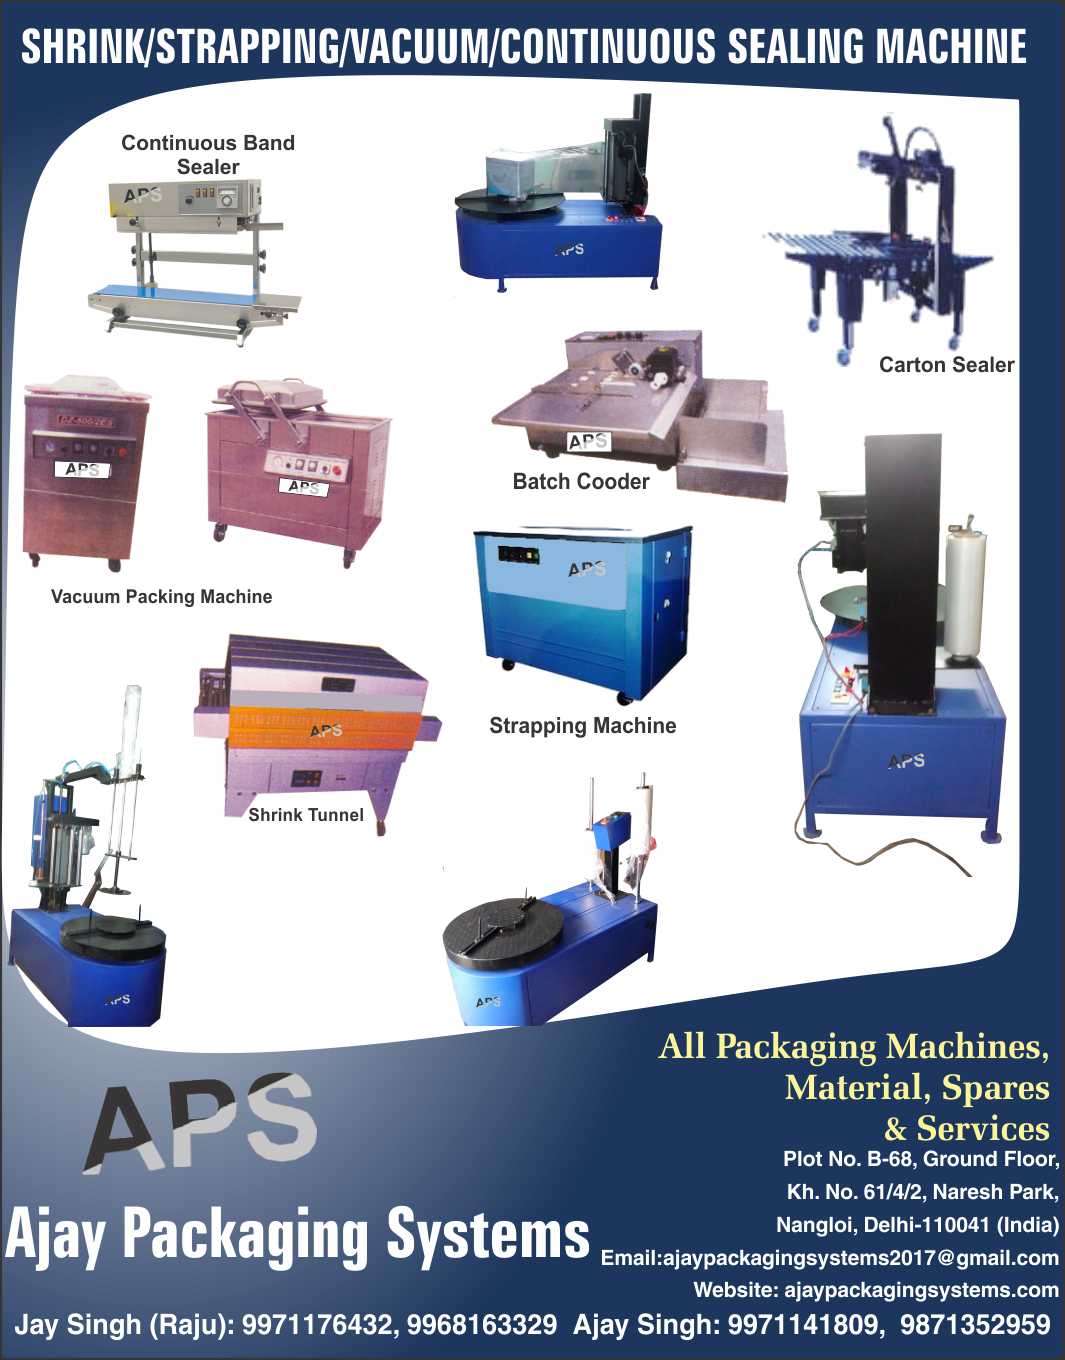 Ajay Packaging Systems